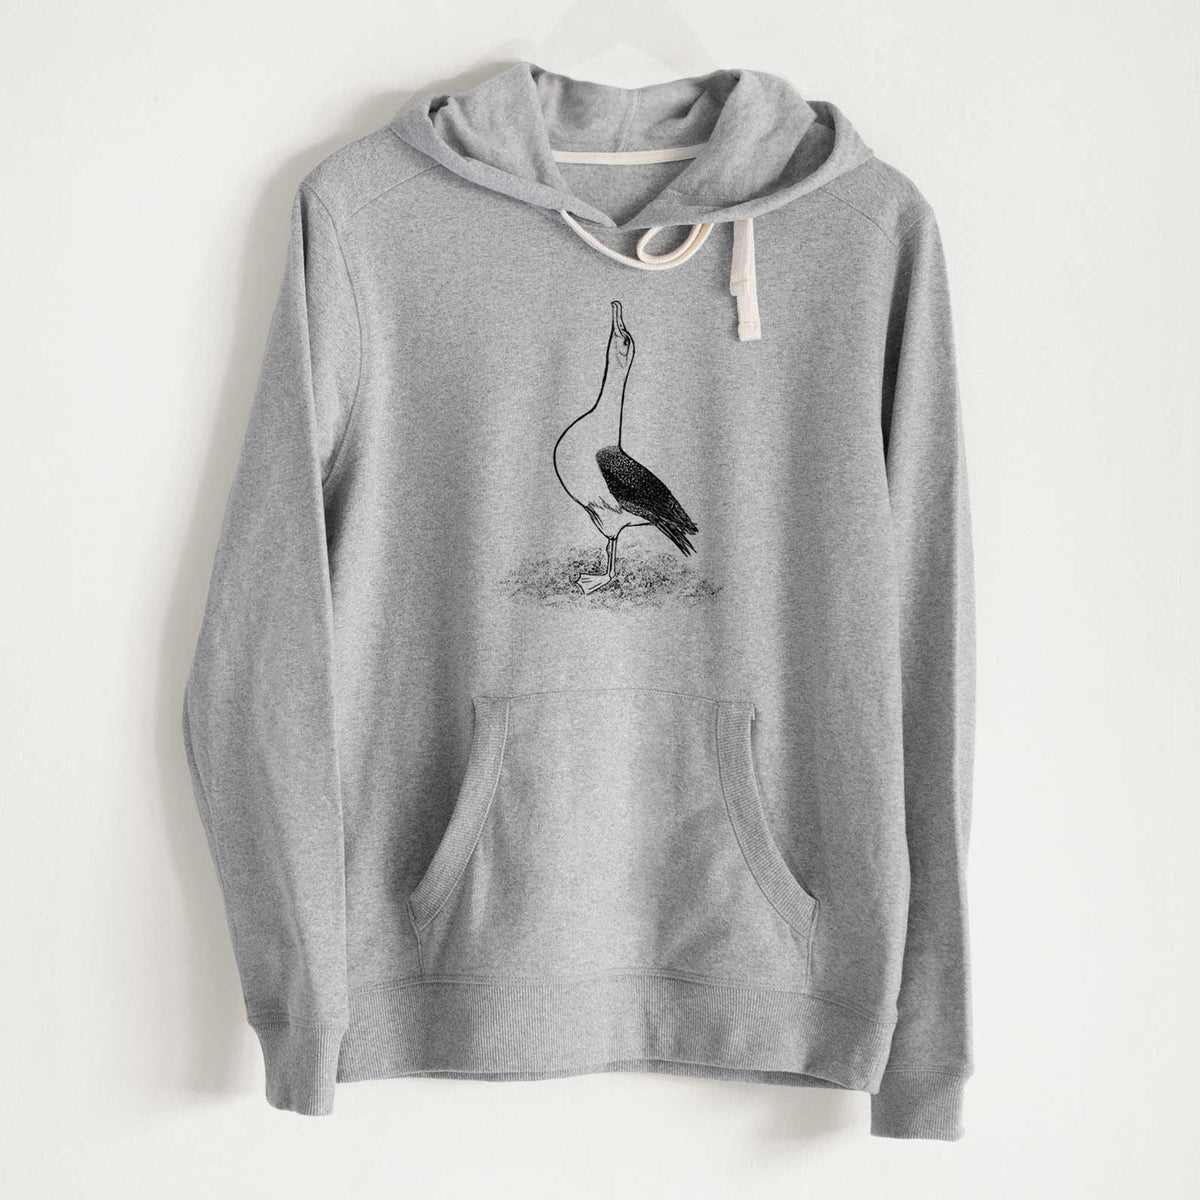 Diomedea exulans - Wandering Albatross - Unisex Recycled Hoodie - CLOSEOUT - FINAL SALE